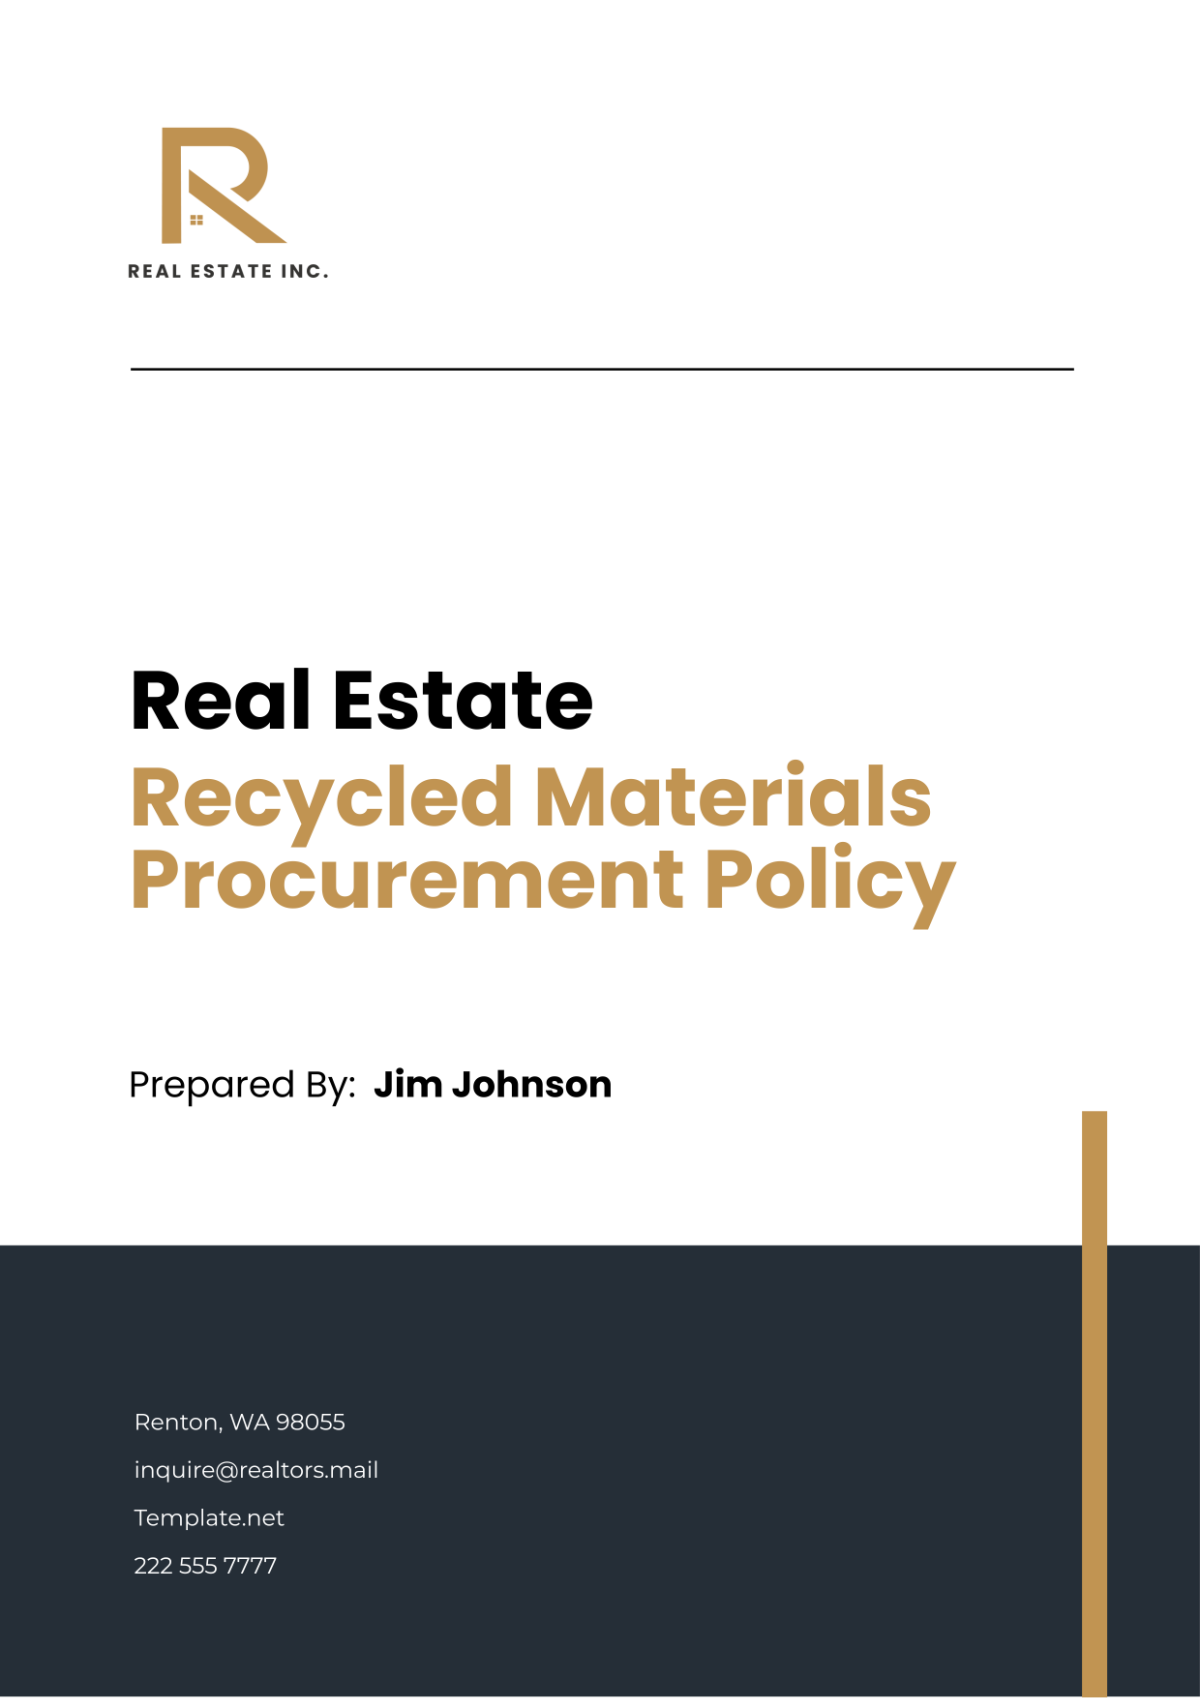 Real Estate Recycled Materials Procurement Policy Template